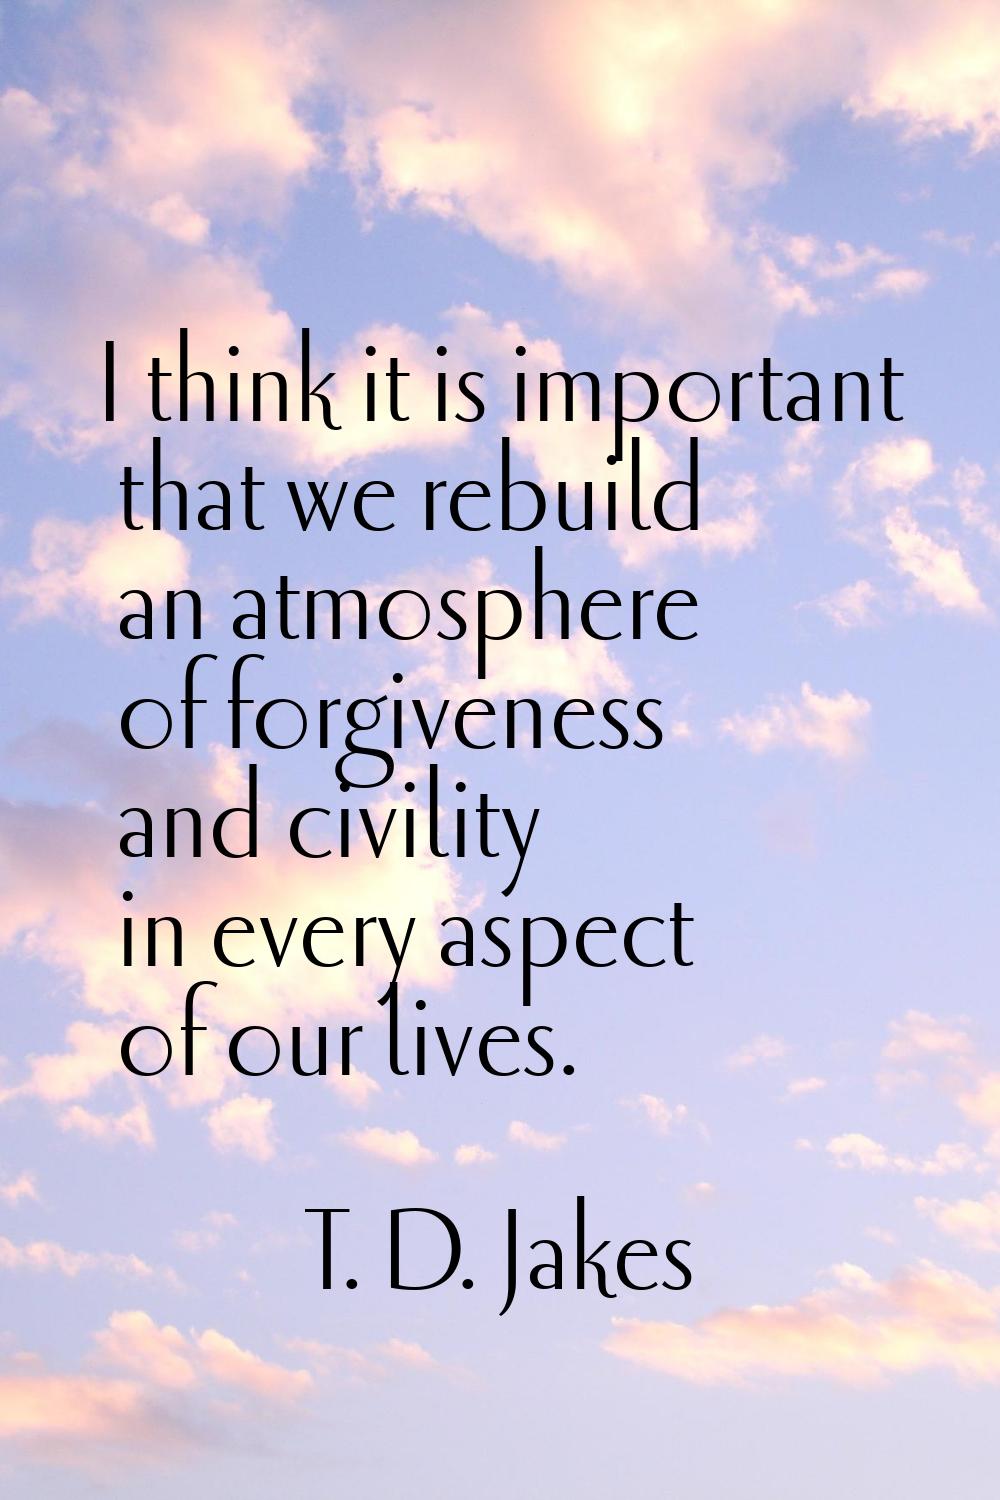 I think it is important that we rebuild an atmosphere of forgiveness and civility in every aspect o